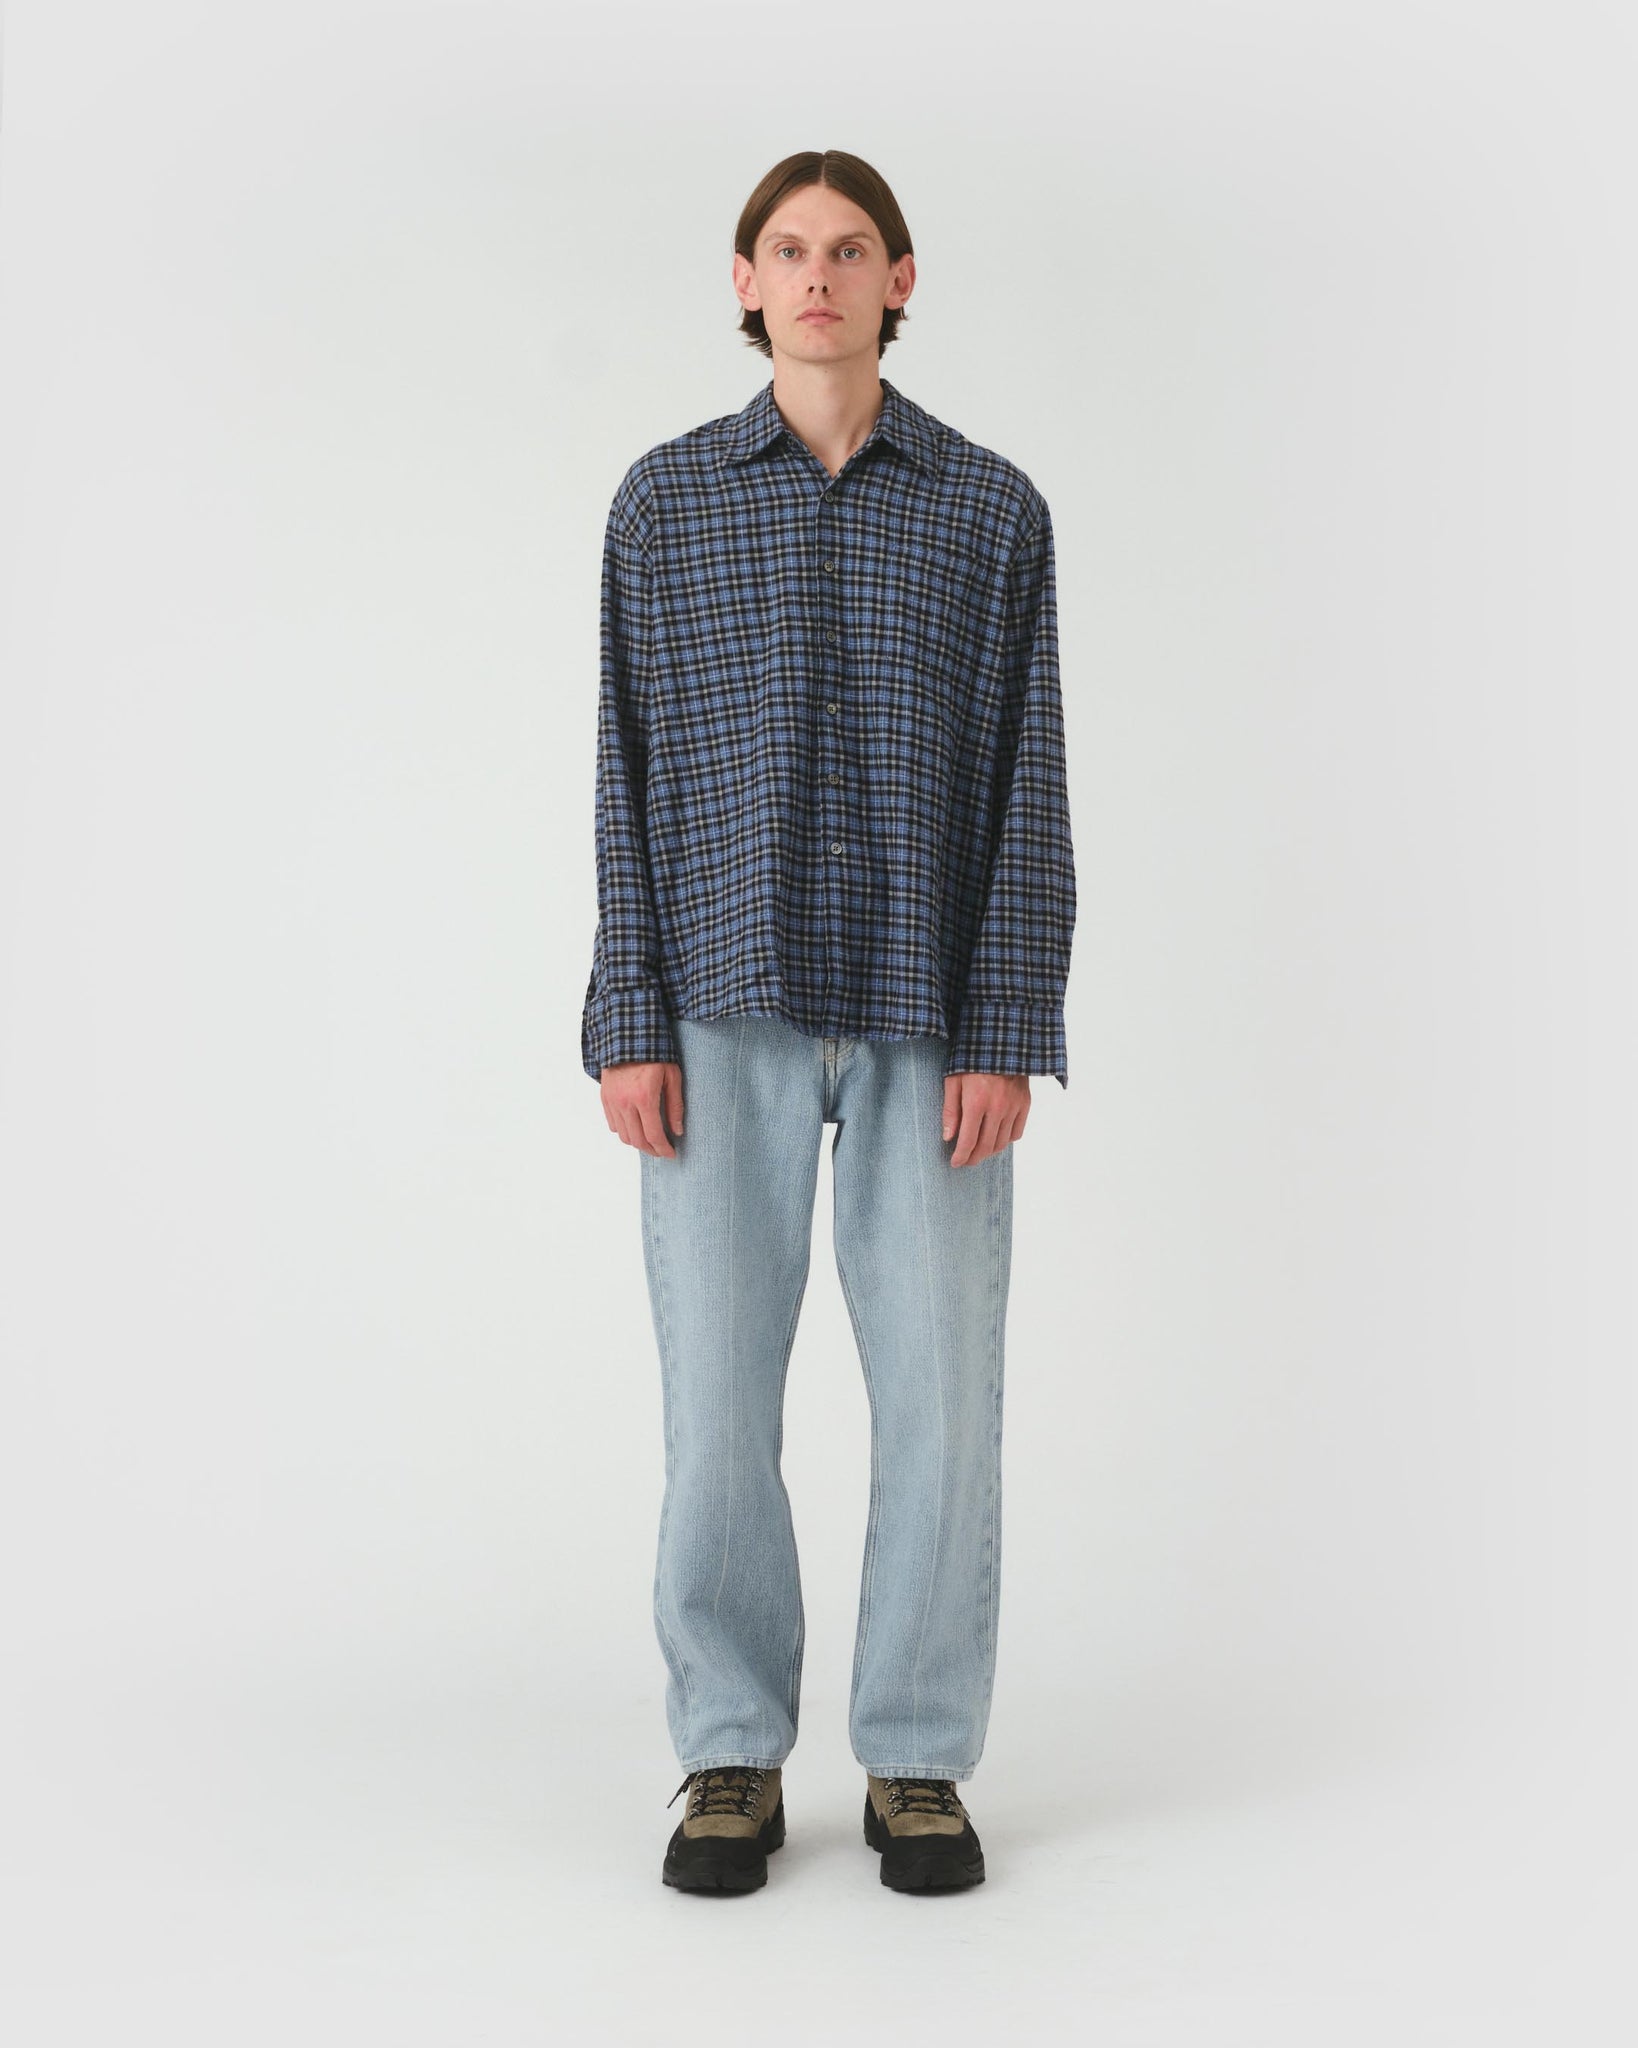 Above Shirt - Cantrell Check